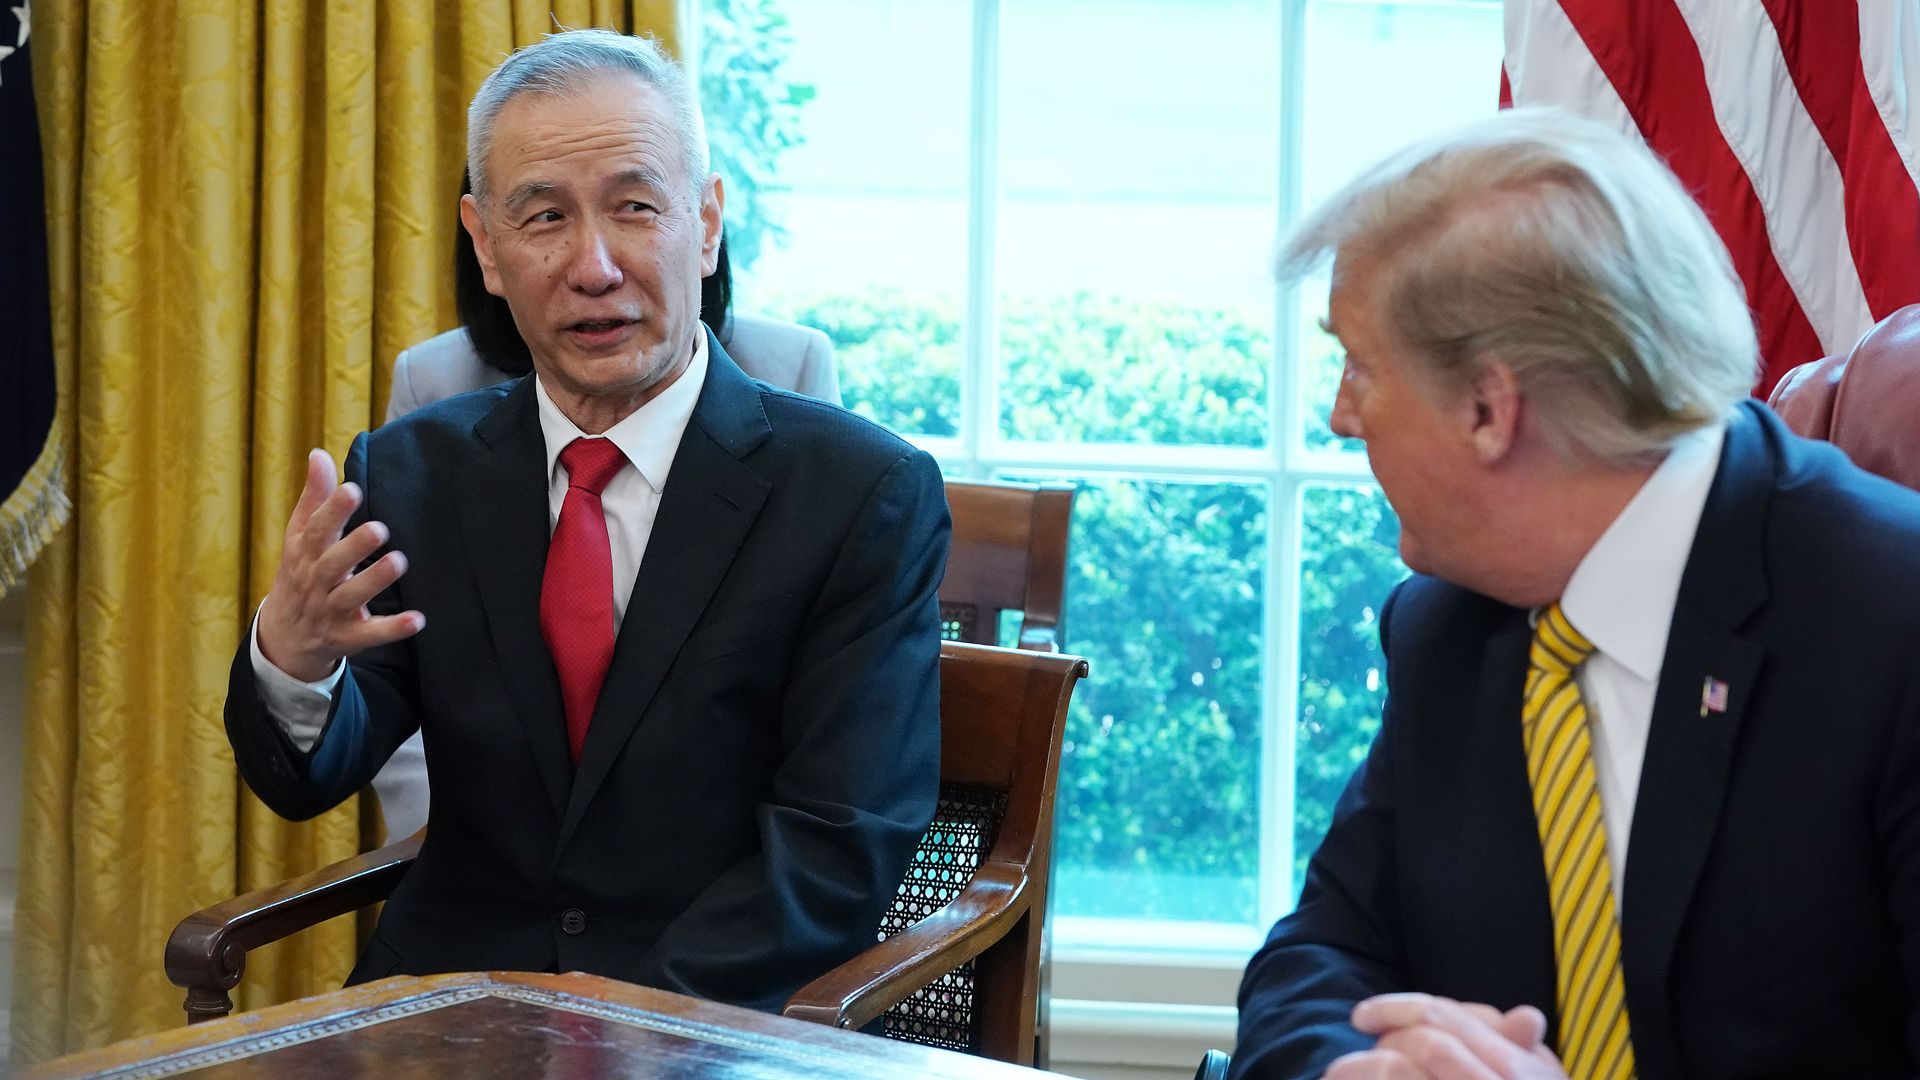 resident Donald Trump stands with Chinese Vice Premier Liu He, before signing the phase 1 of a trade deal between the U.S. and China